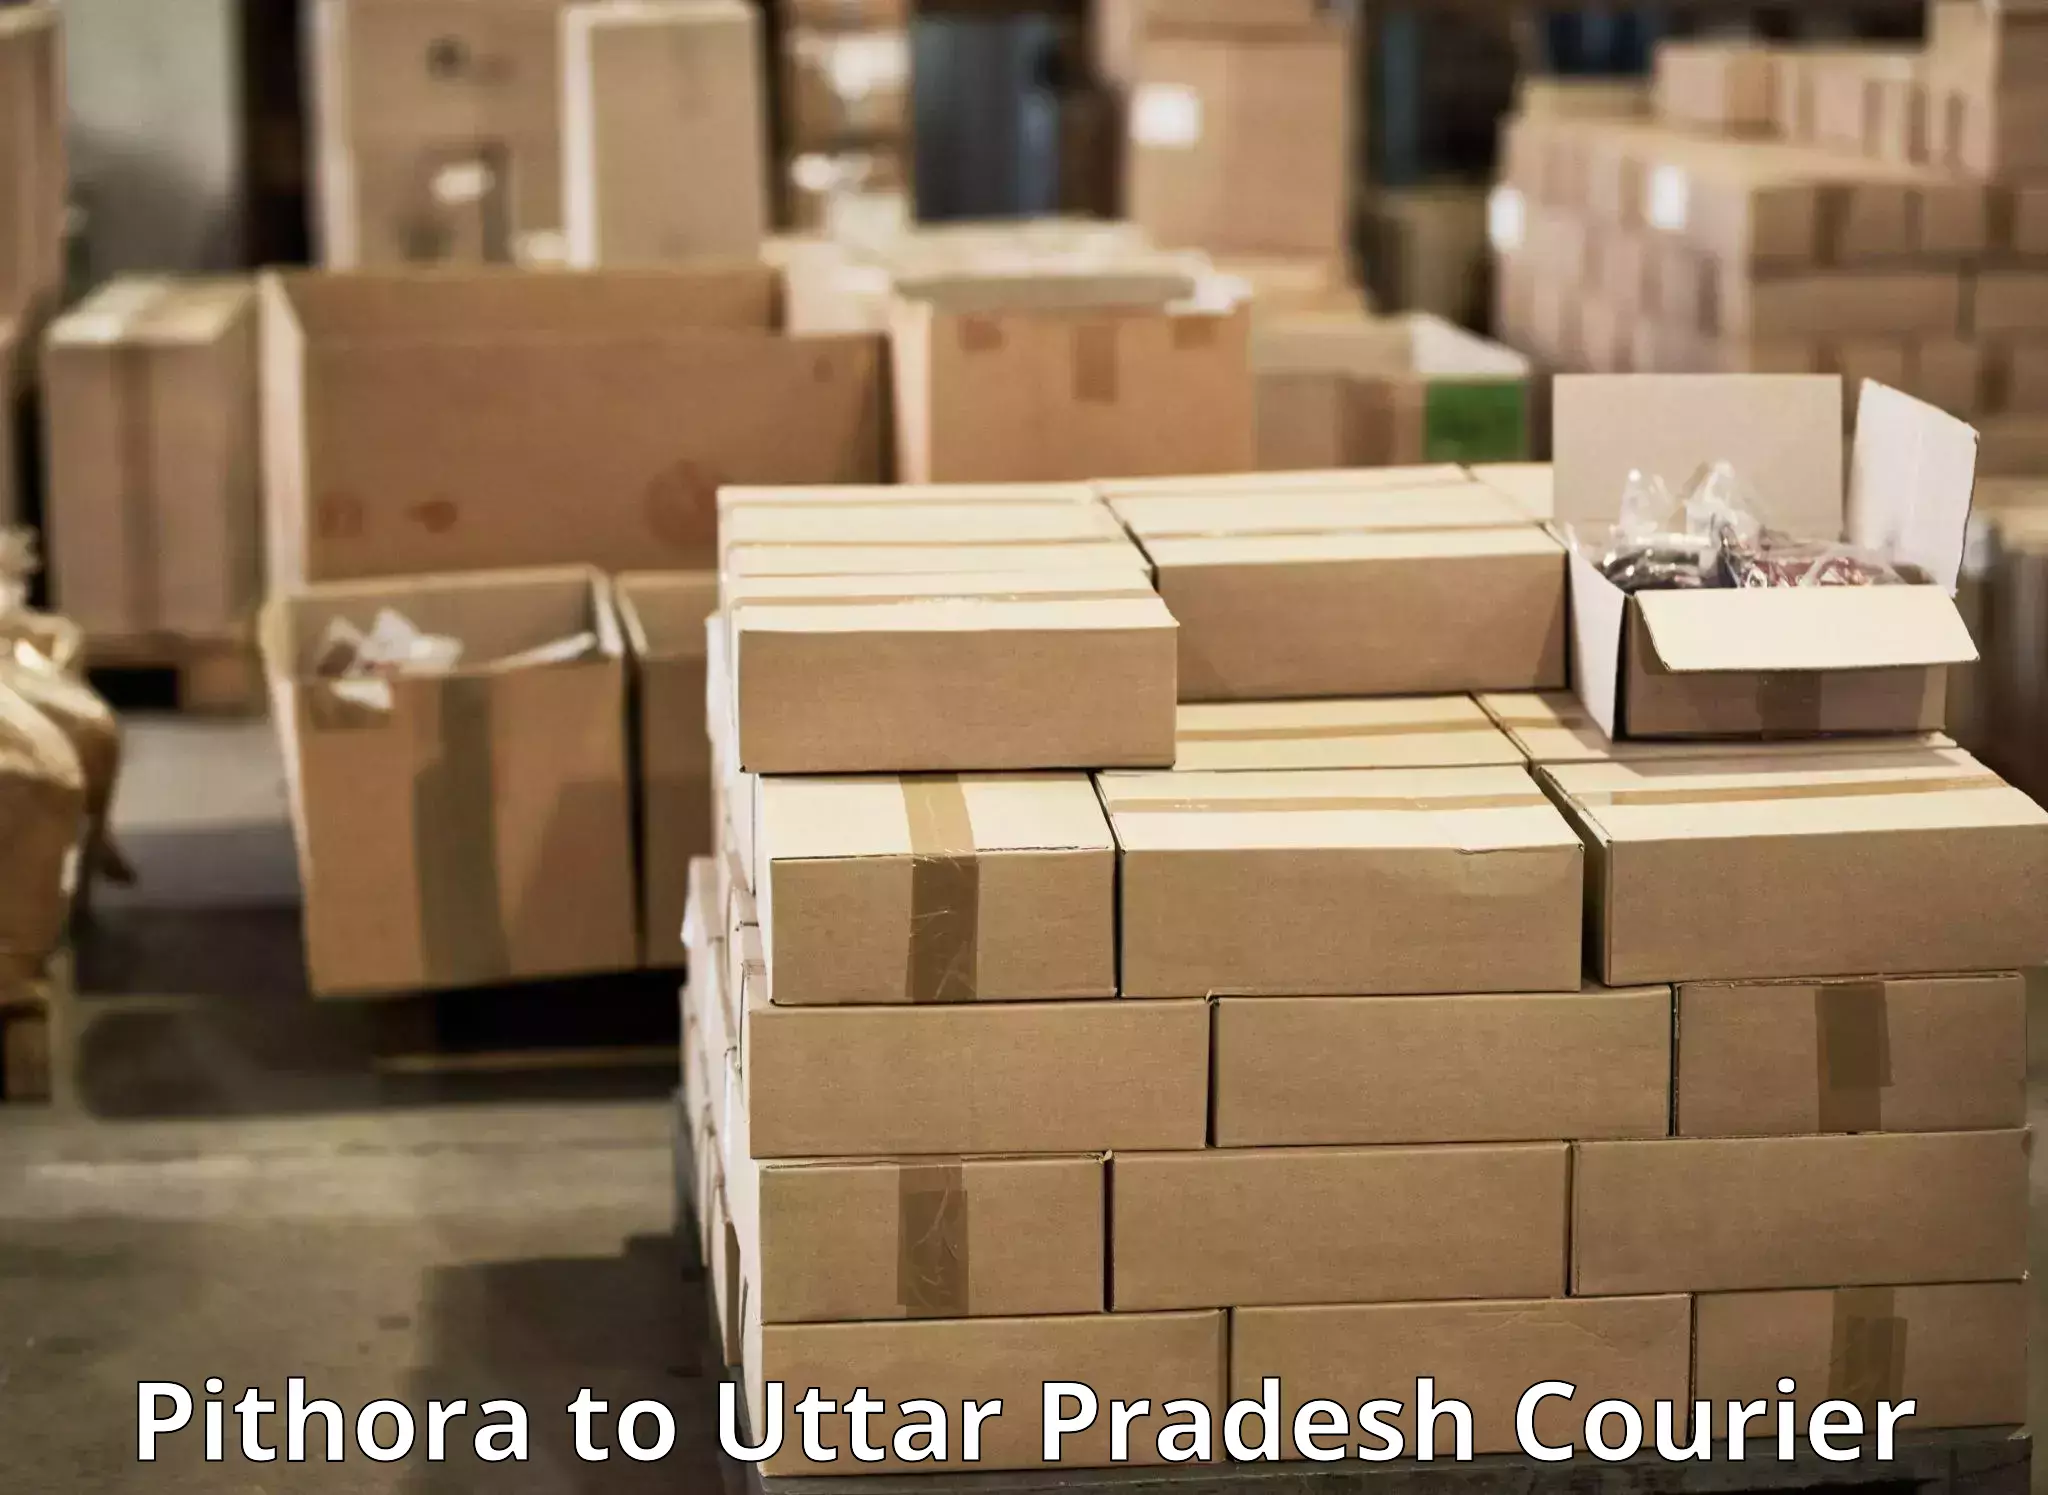 Expedited parcel delivery Pithora to Mathura